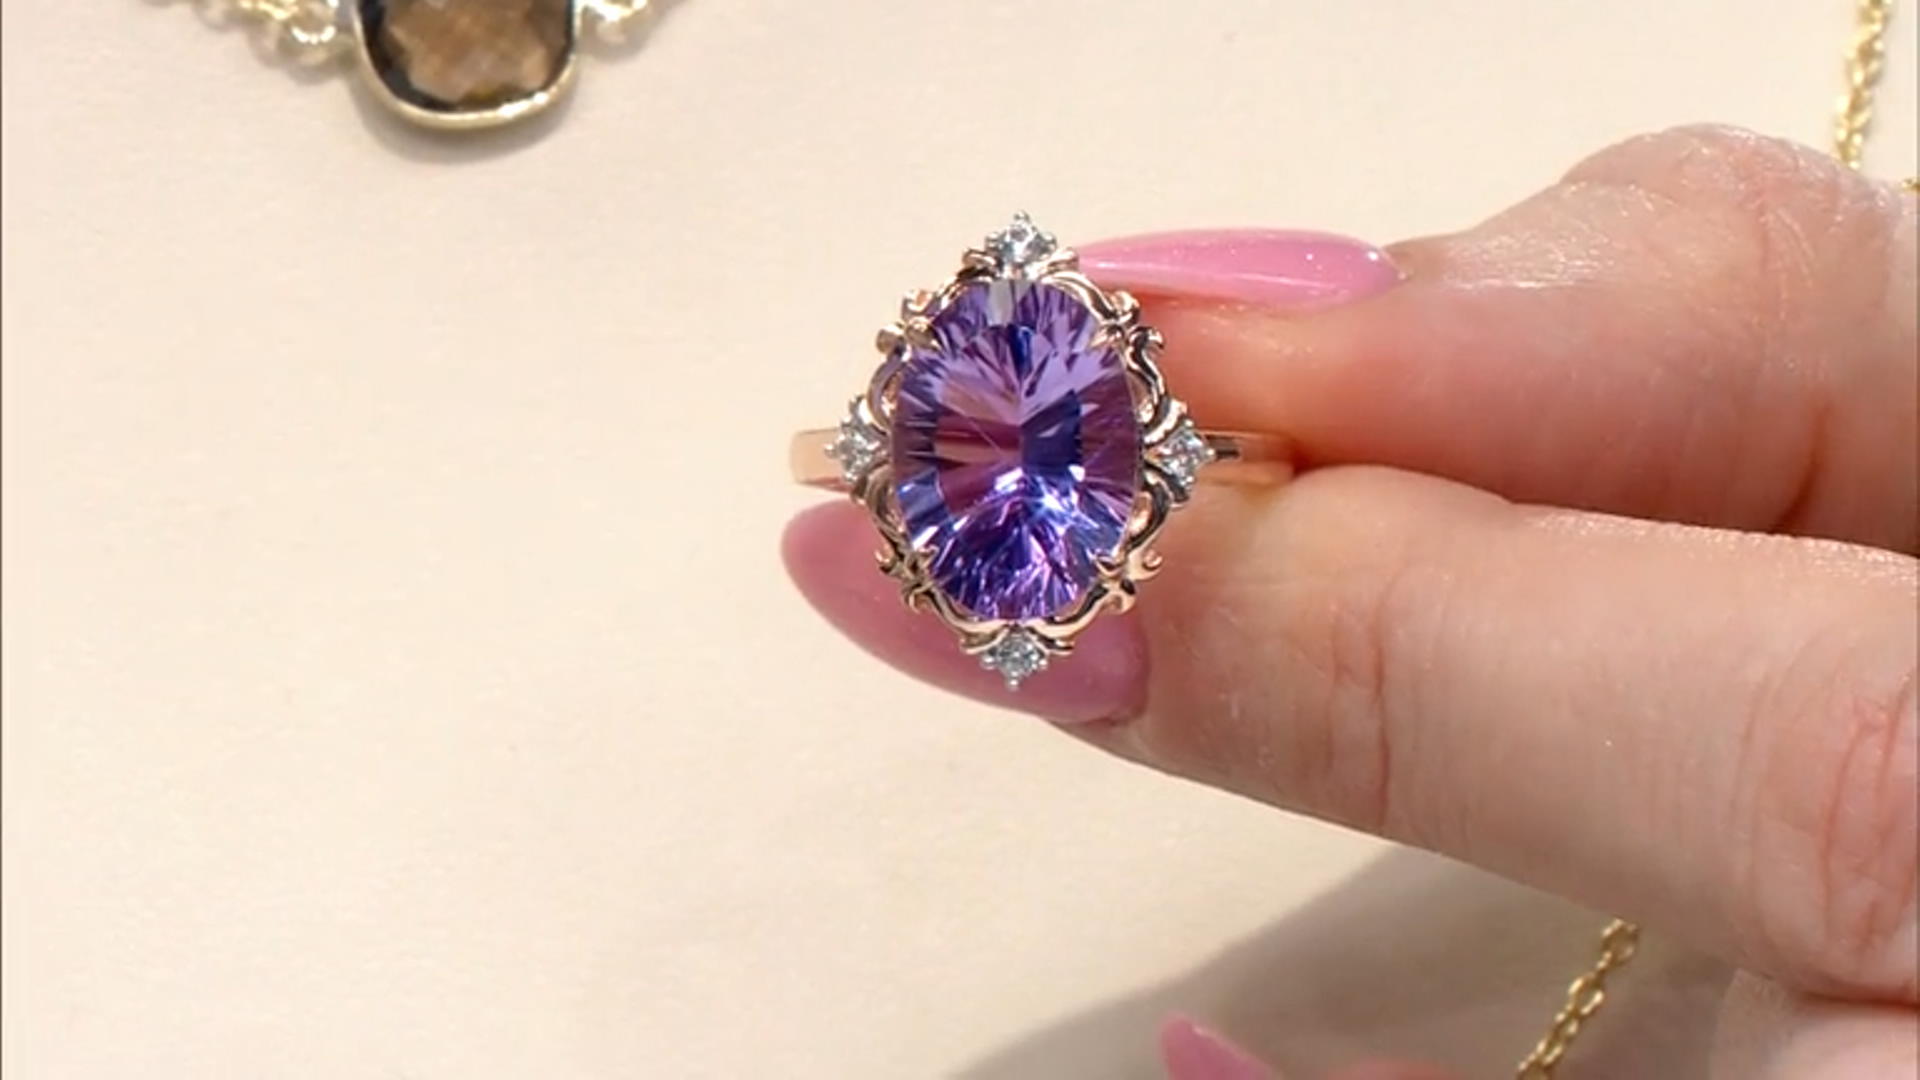 Purple Amethyst 18k Rose Gold Over Sterling Silver Ring 4.80ctw Video Thumbnail